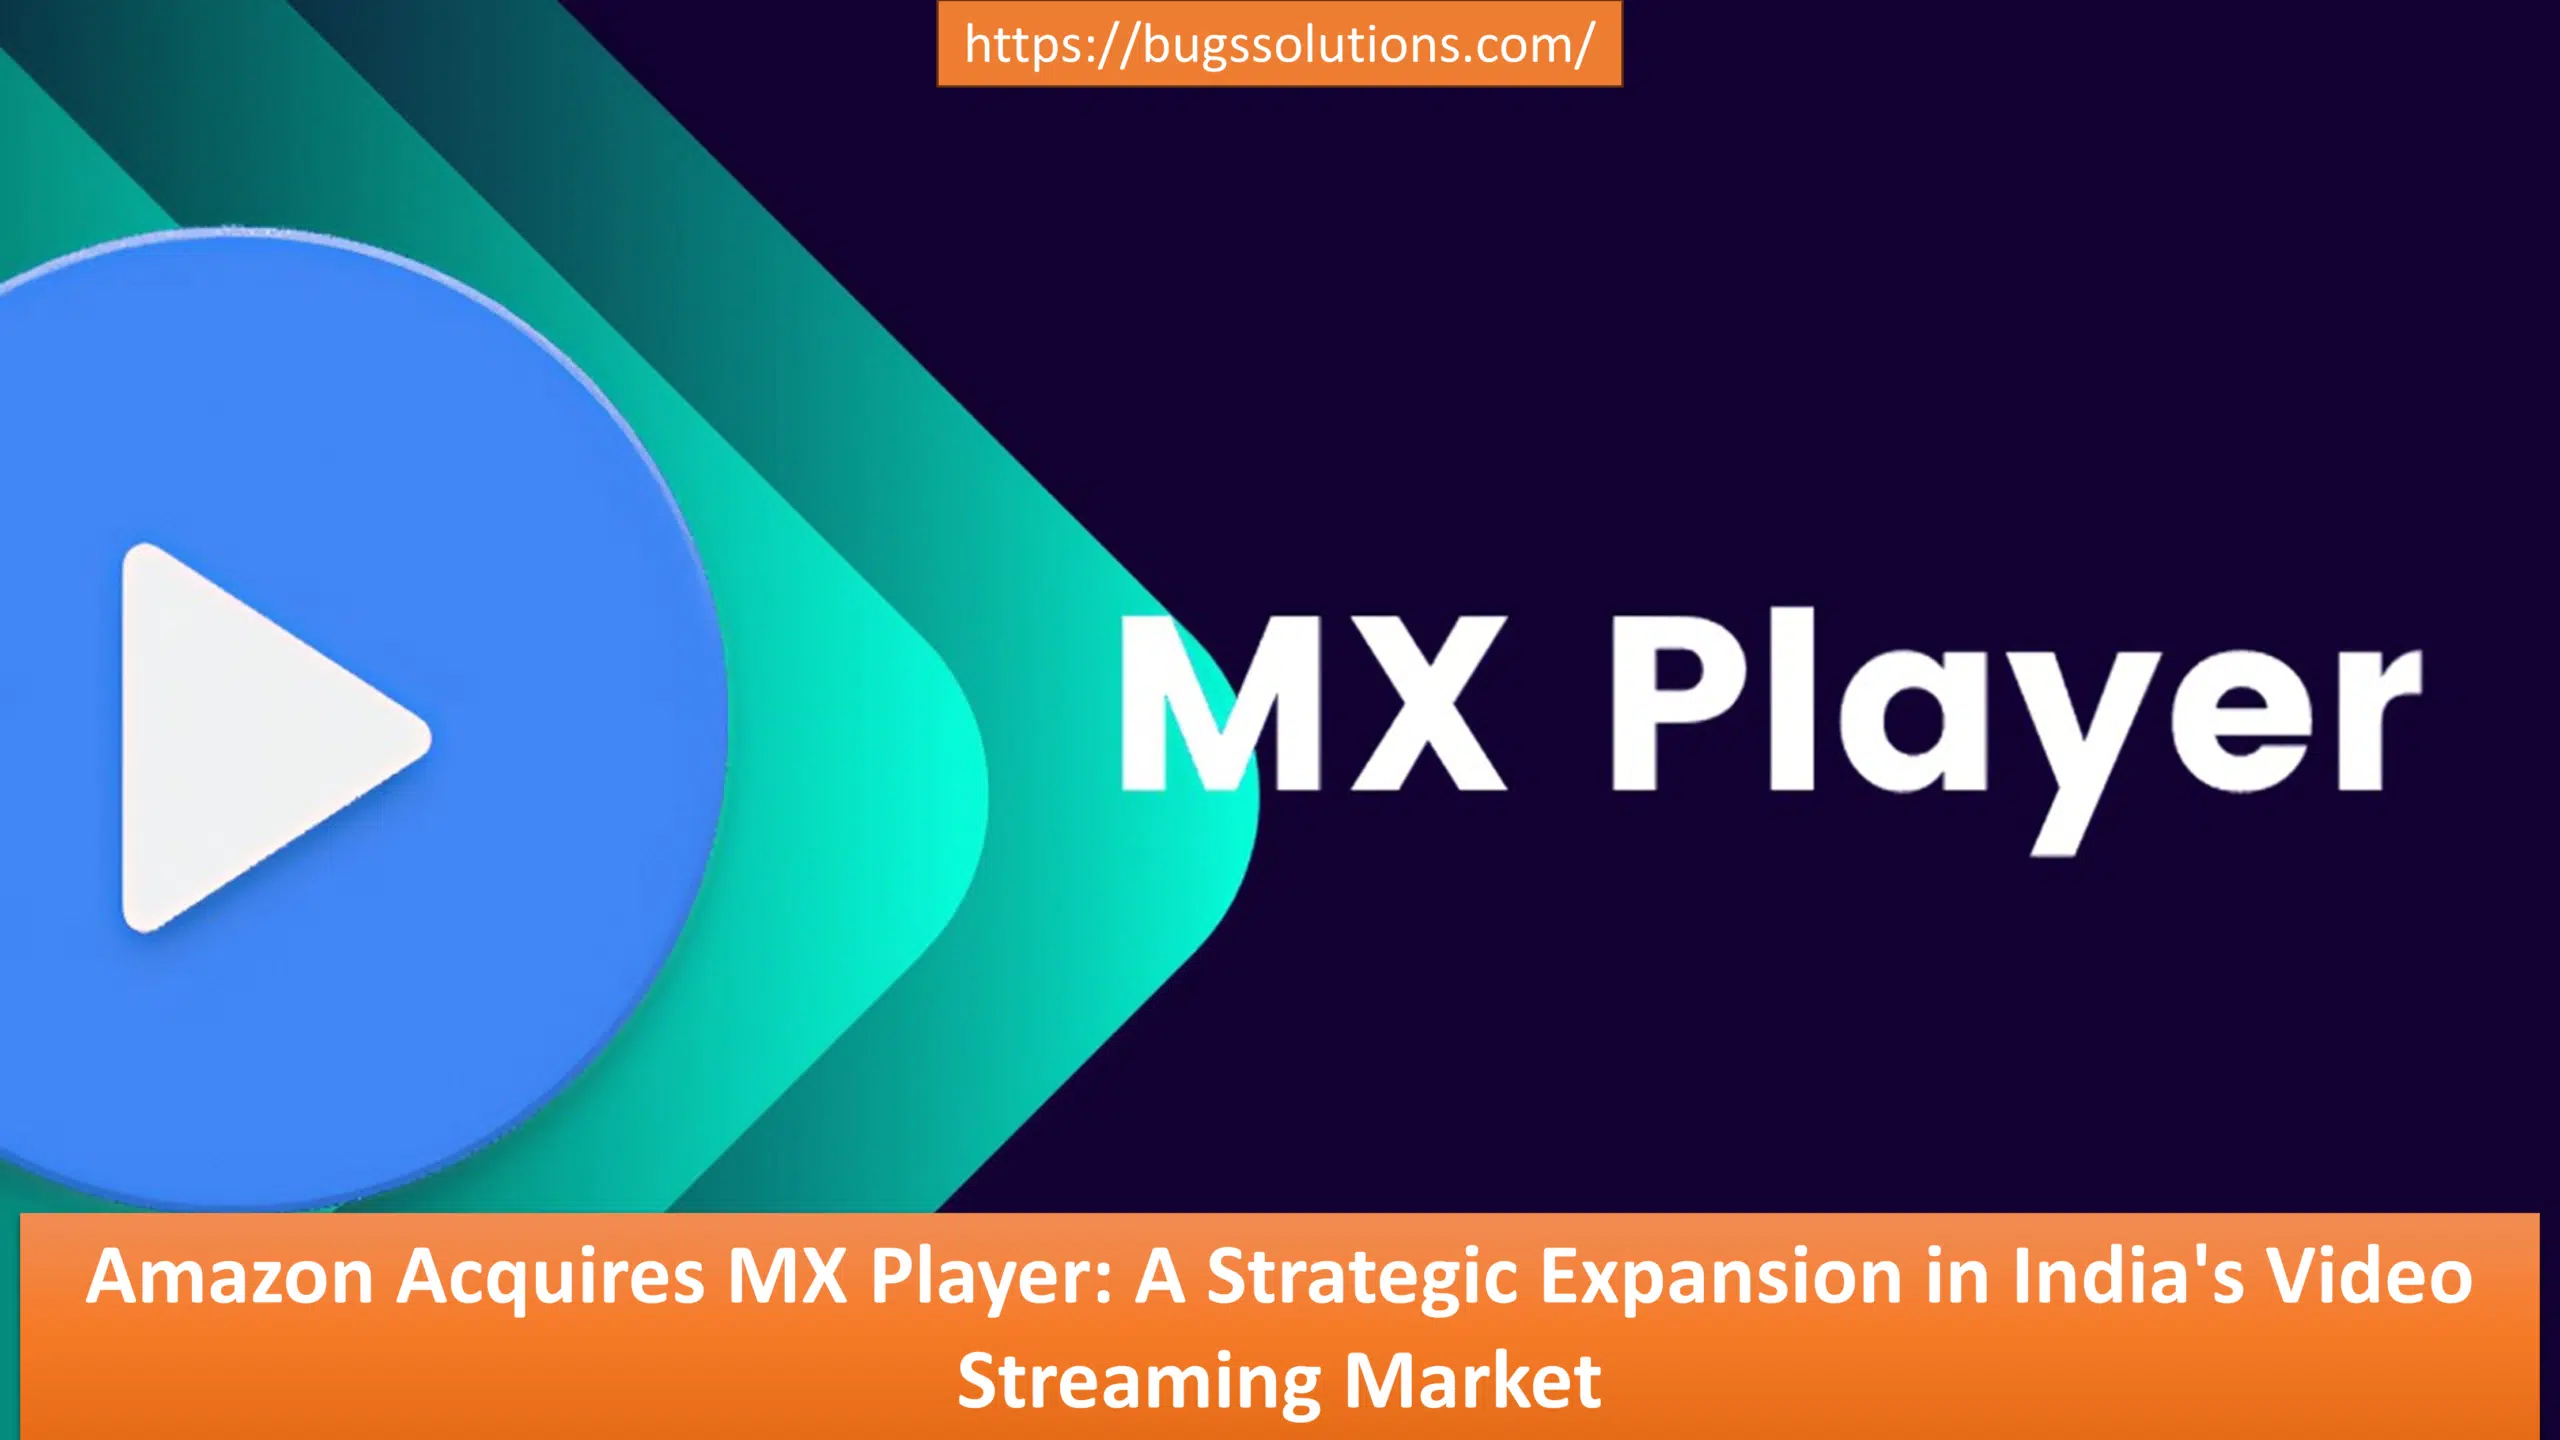 Amazon Acquires MX Player A Strategic Expansion in India's Video Streaming Market